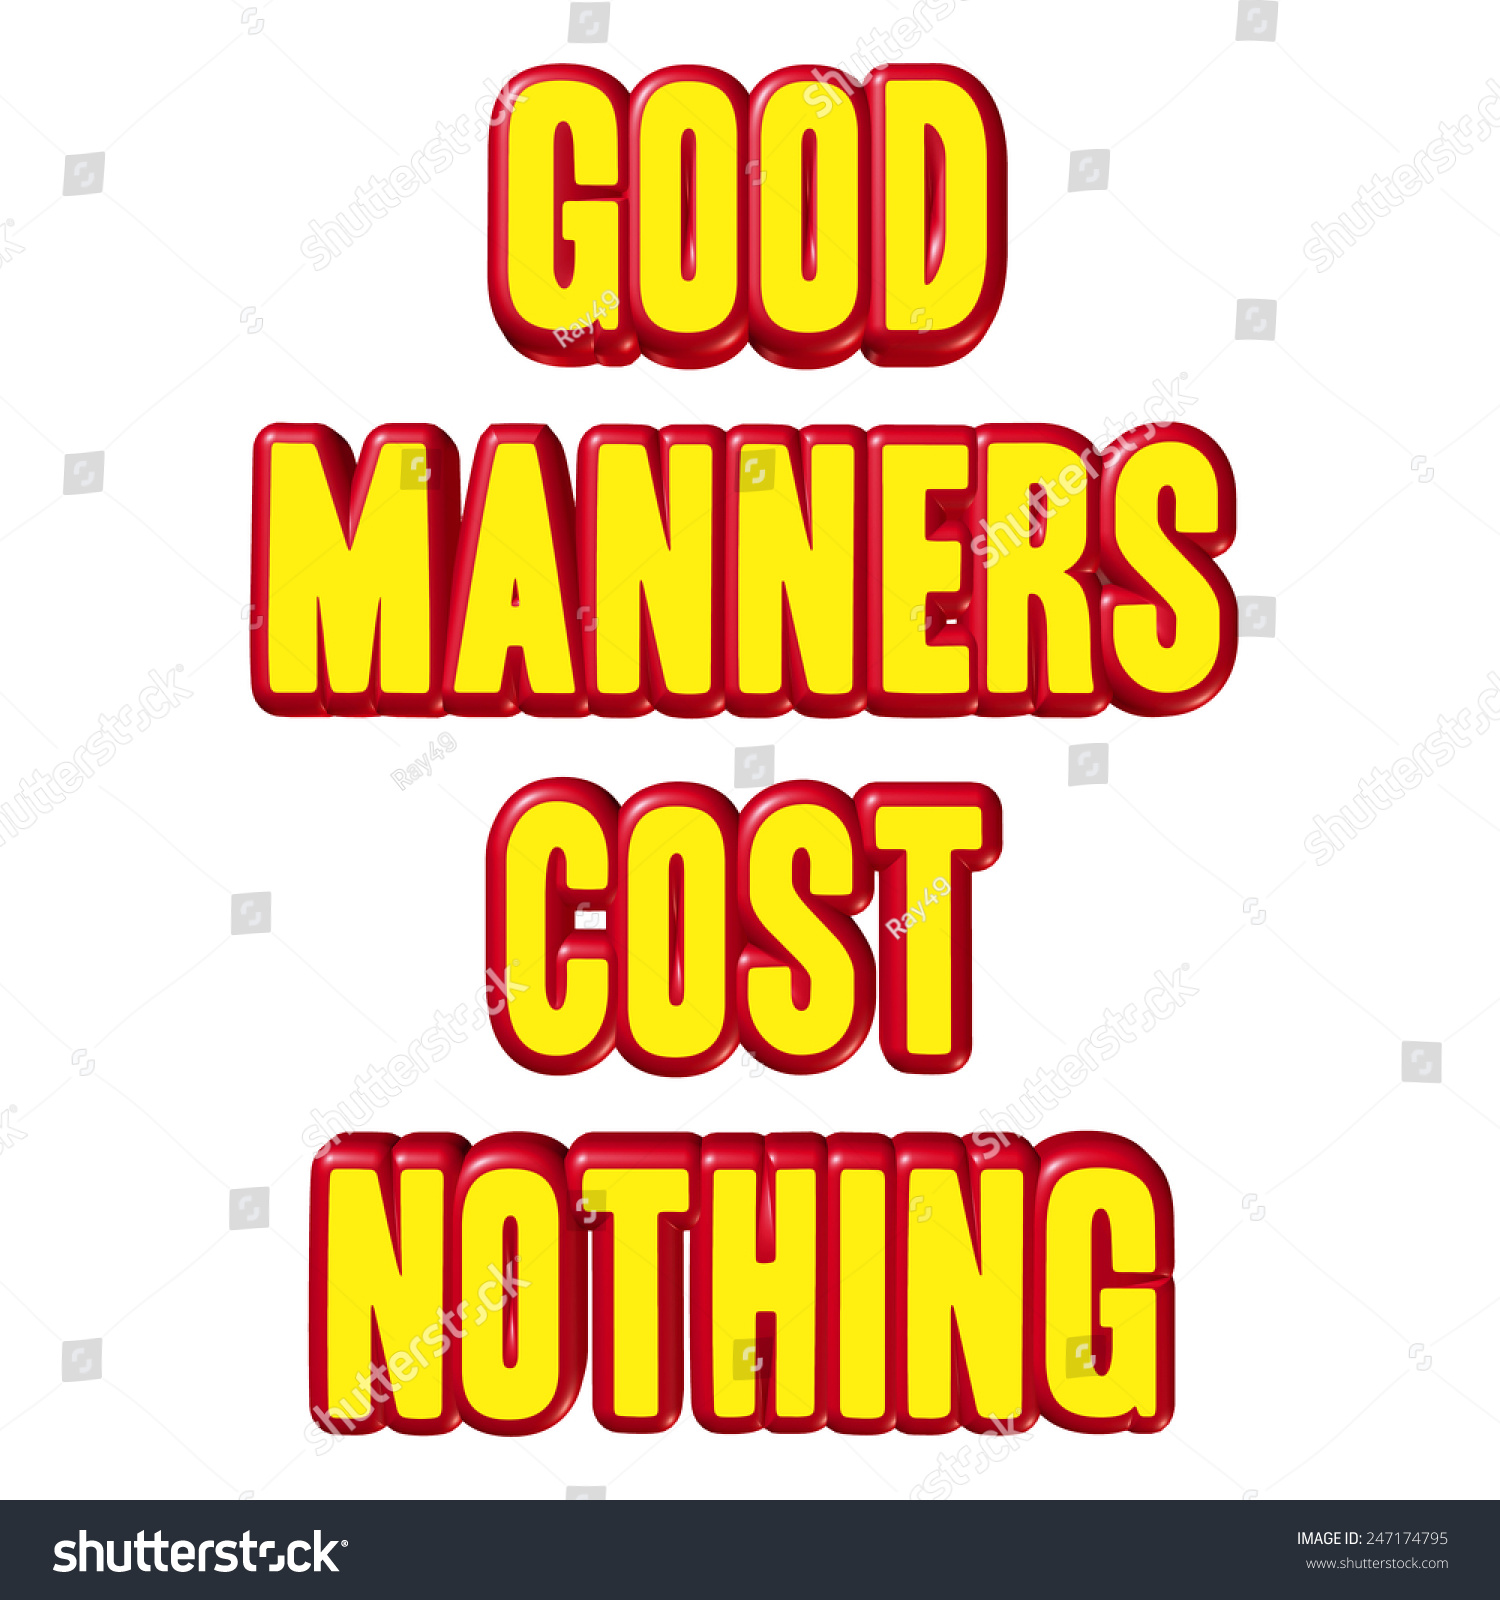 clipart of good manners - photo #20